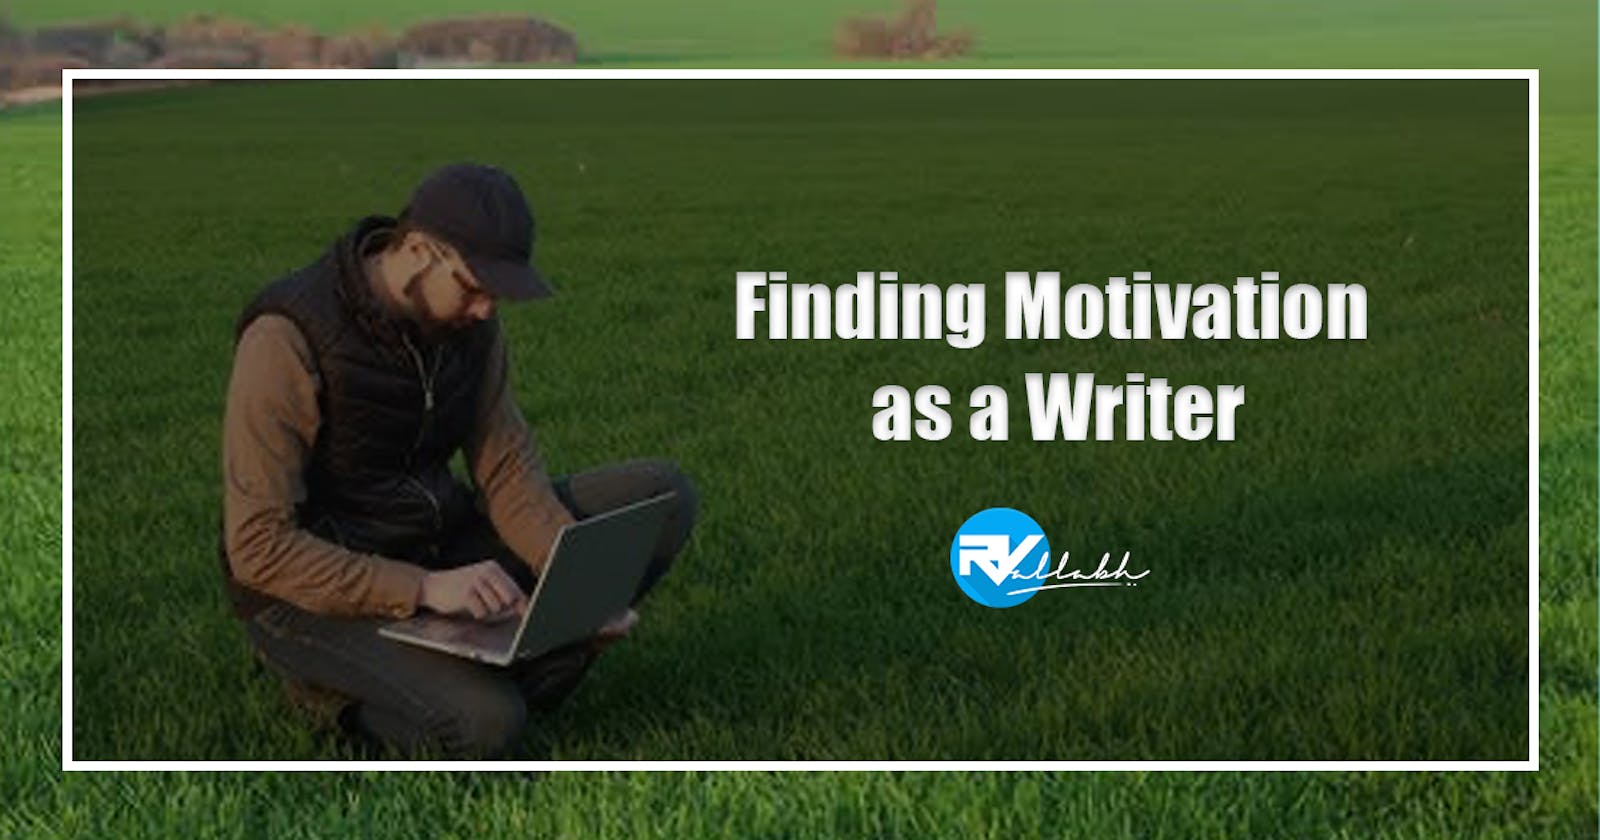 Finding motivation as a writer